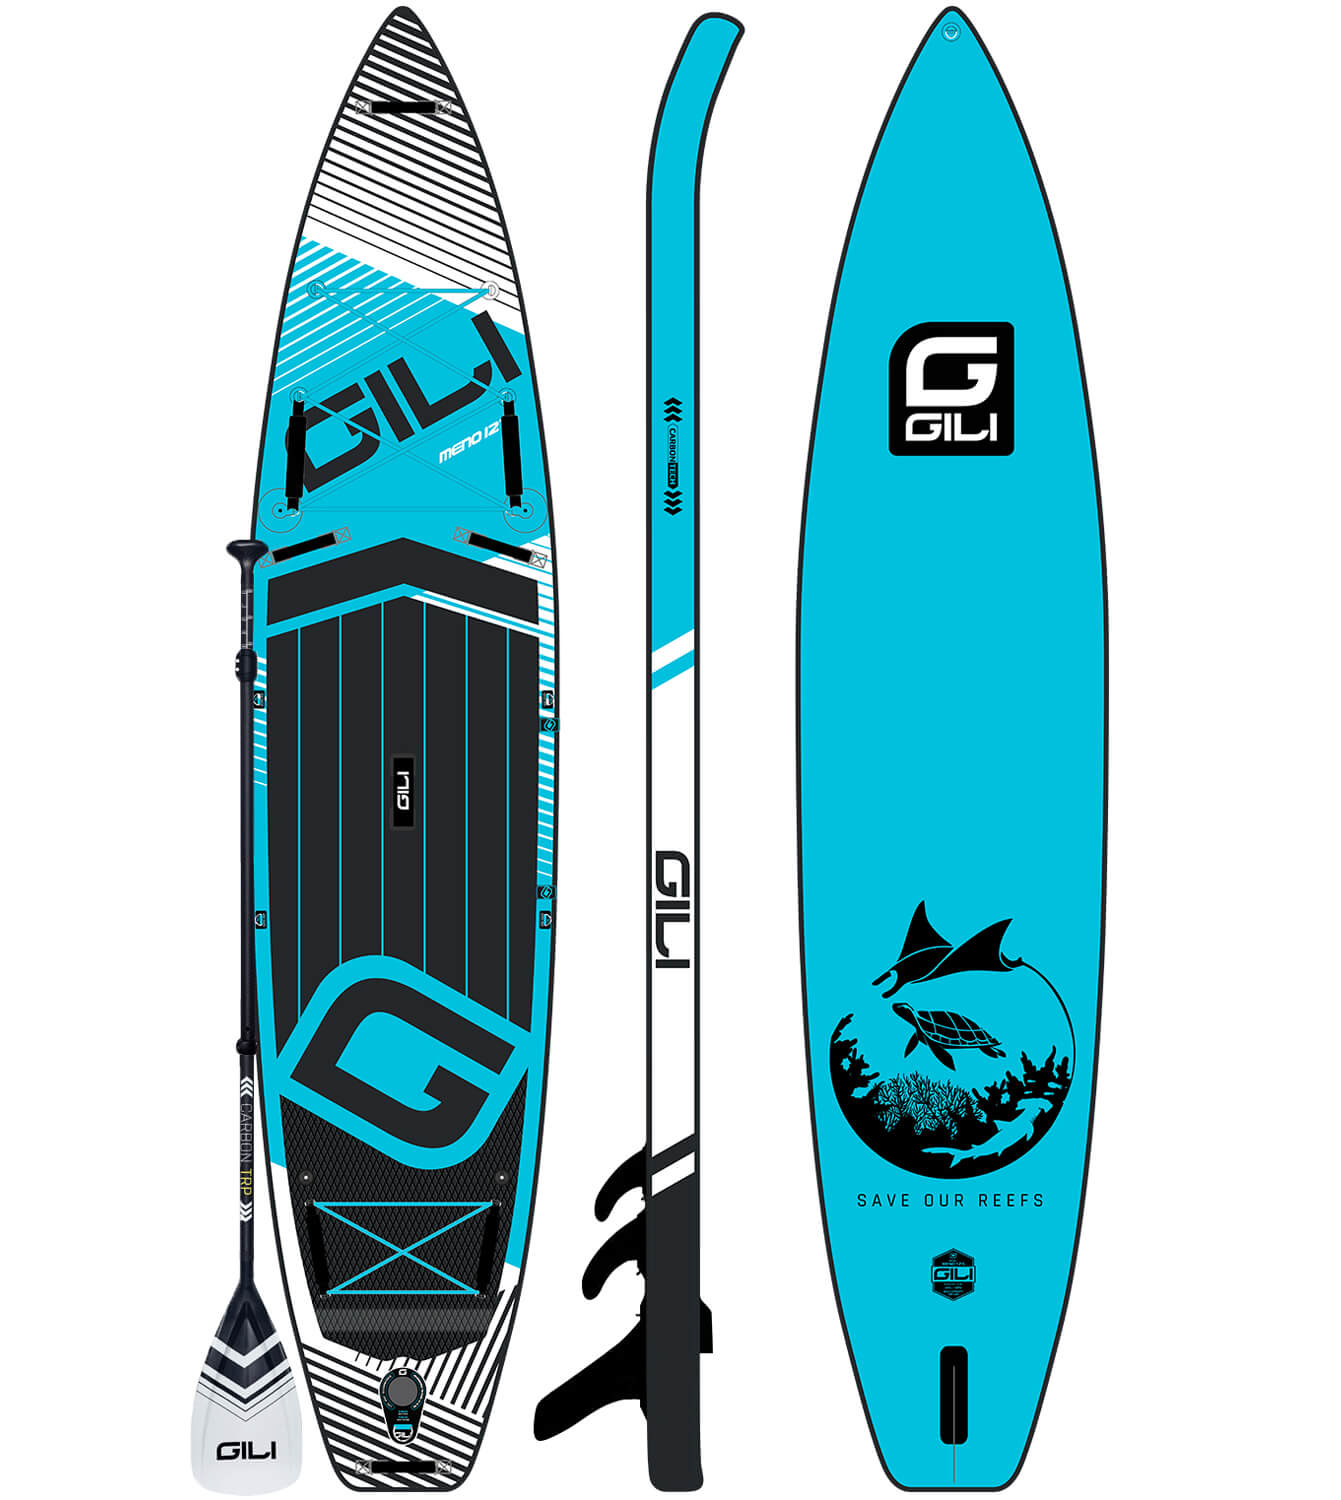 GILI Meno 12'6 Touring - Runner Up for Best Touring Board